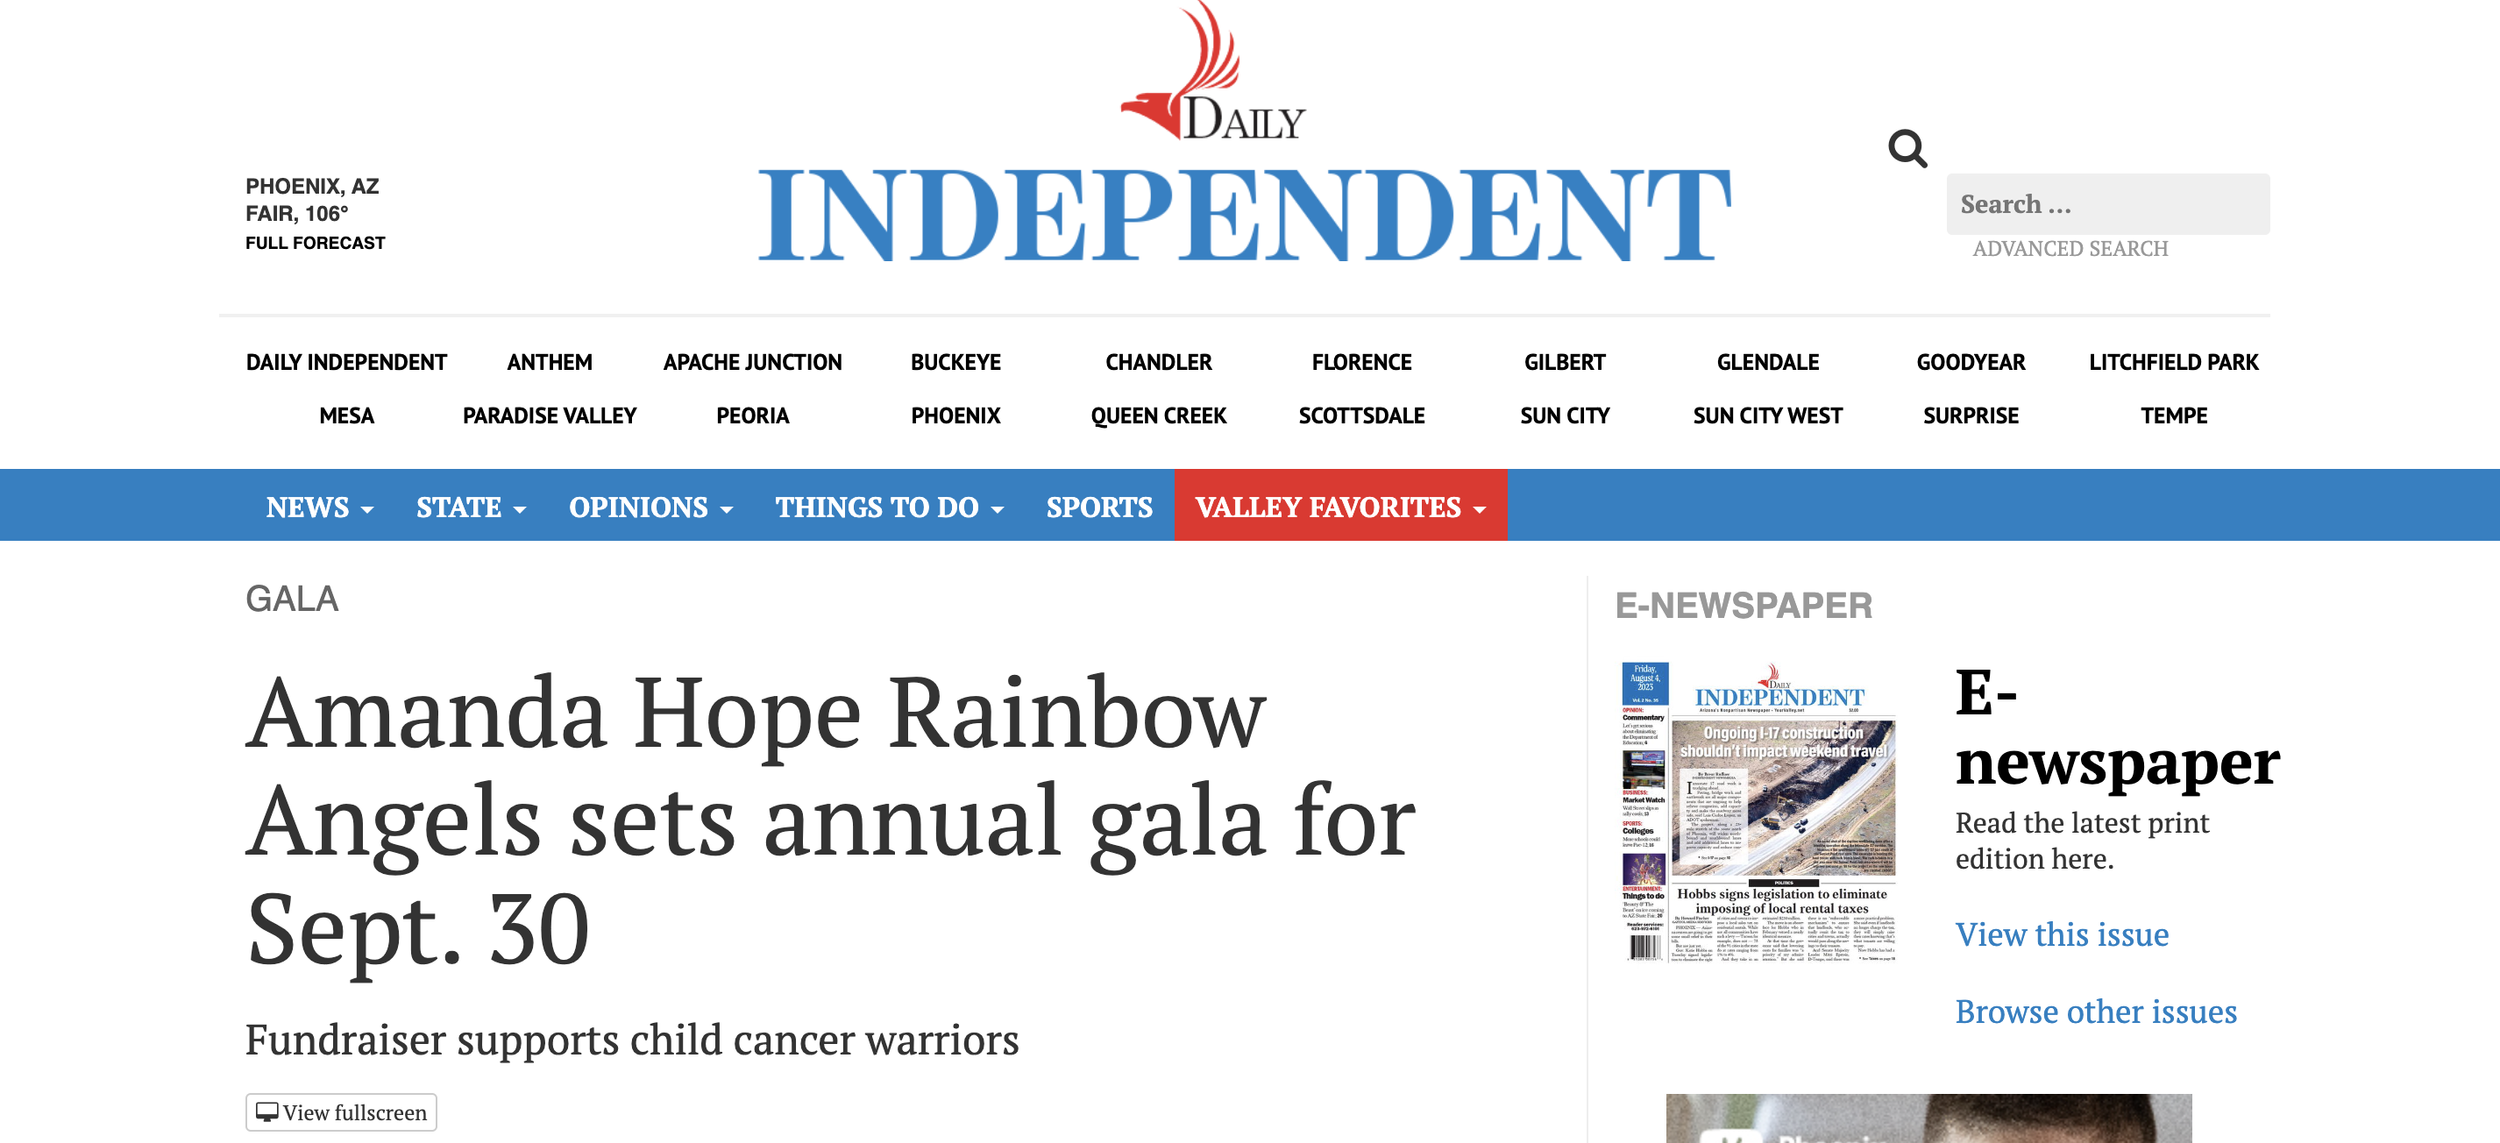 Daily Independent: Amanda Hope Rainbow Angels sets annual gala for Sept. 30 